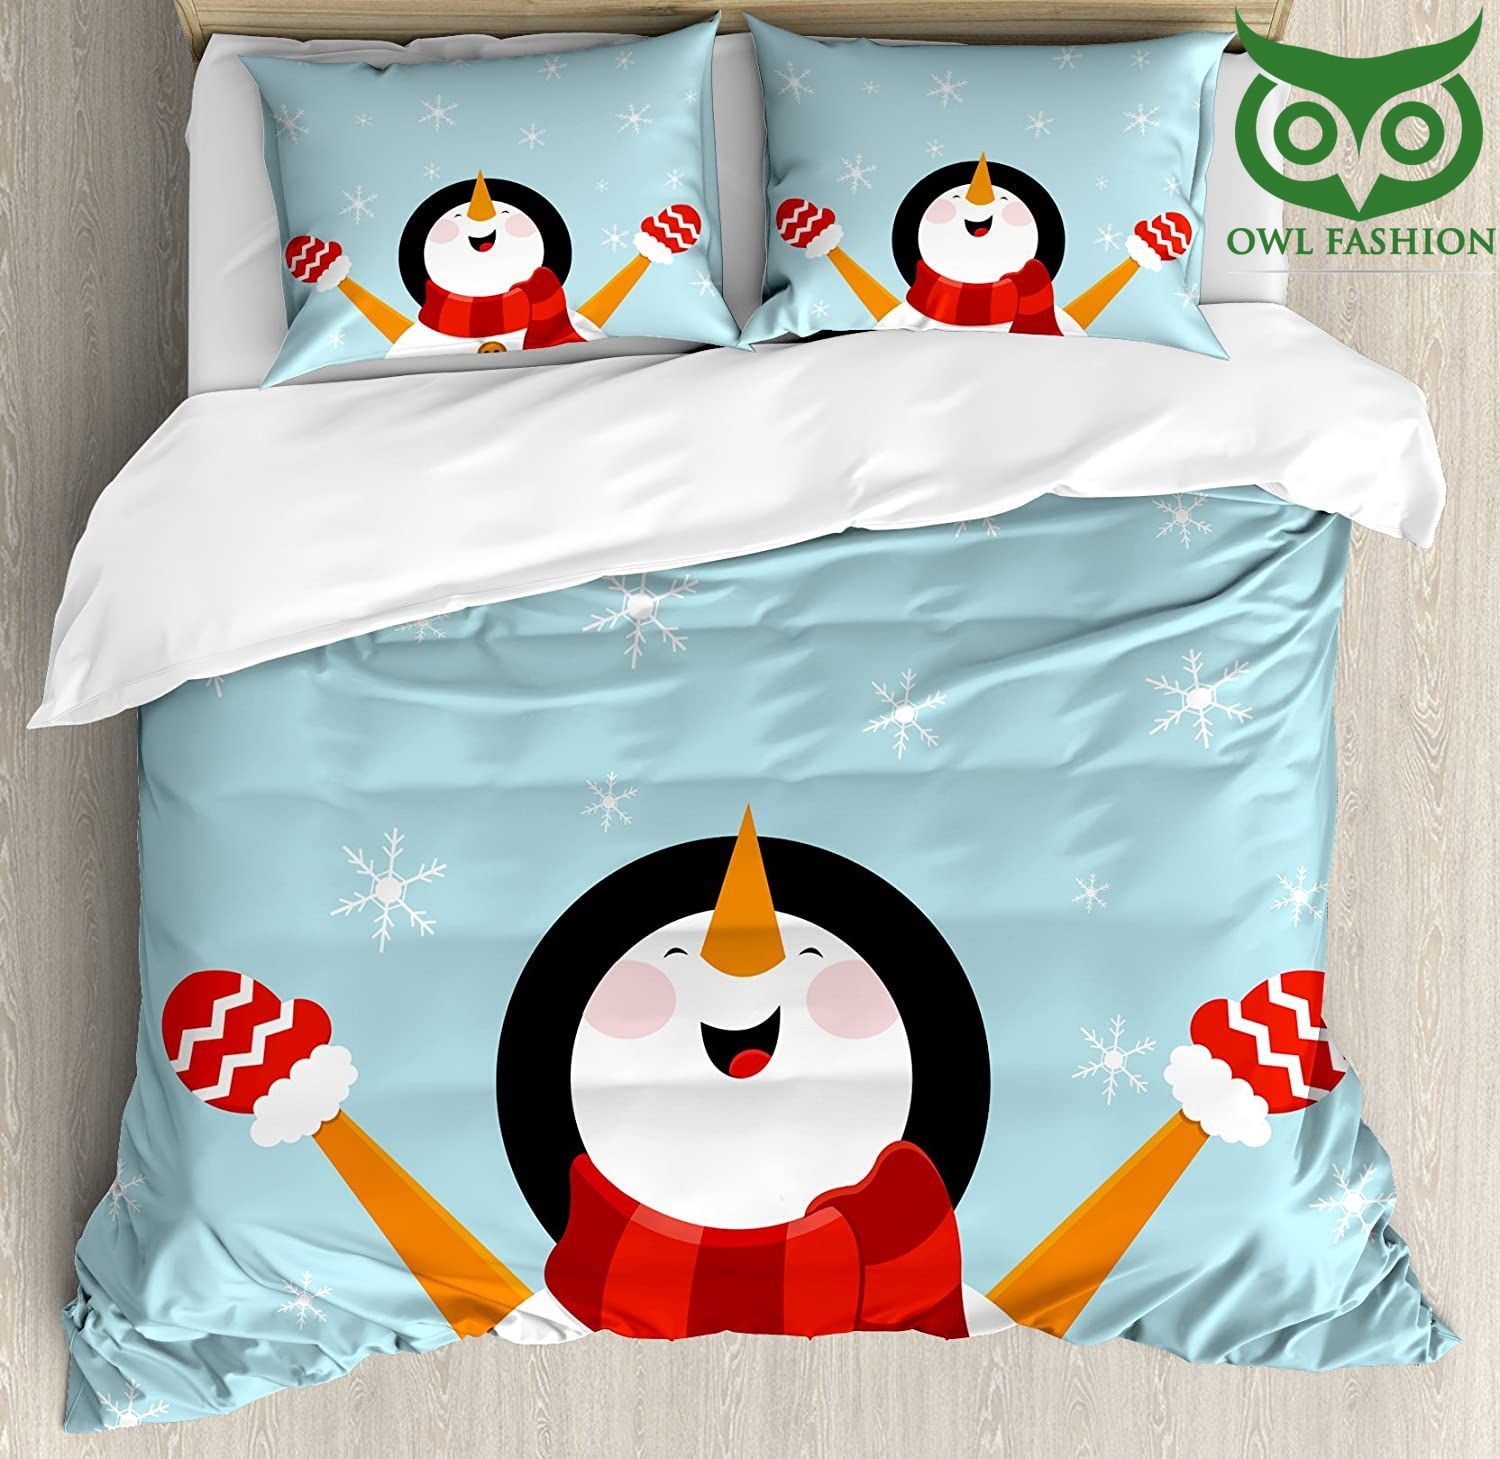 31 Snowman bedding set Happy Smiling Snowman with Ornate Snowflakes